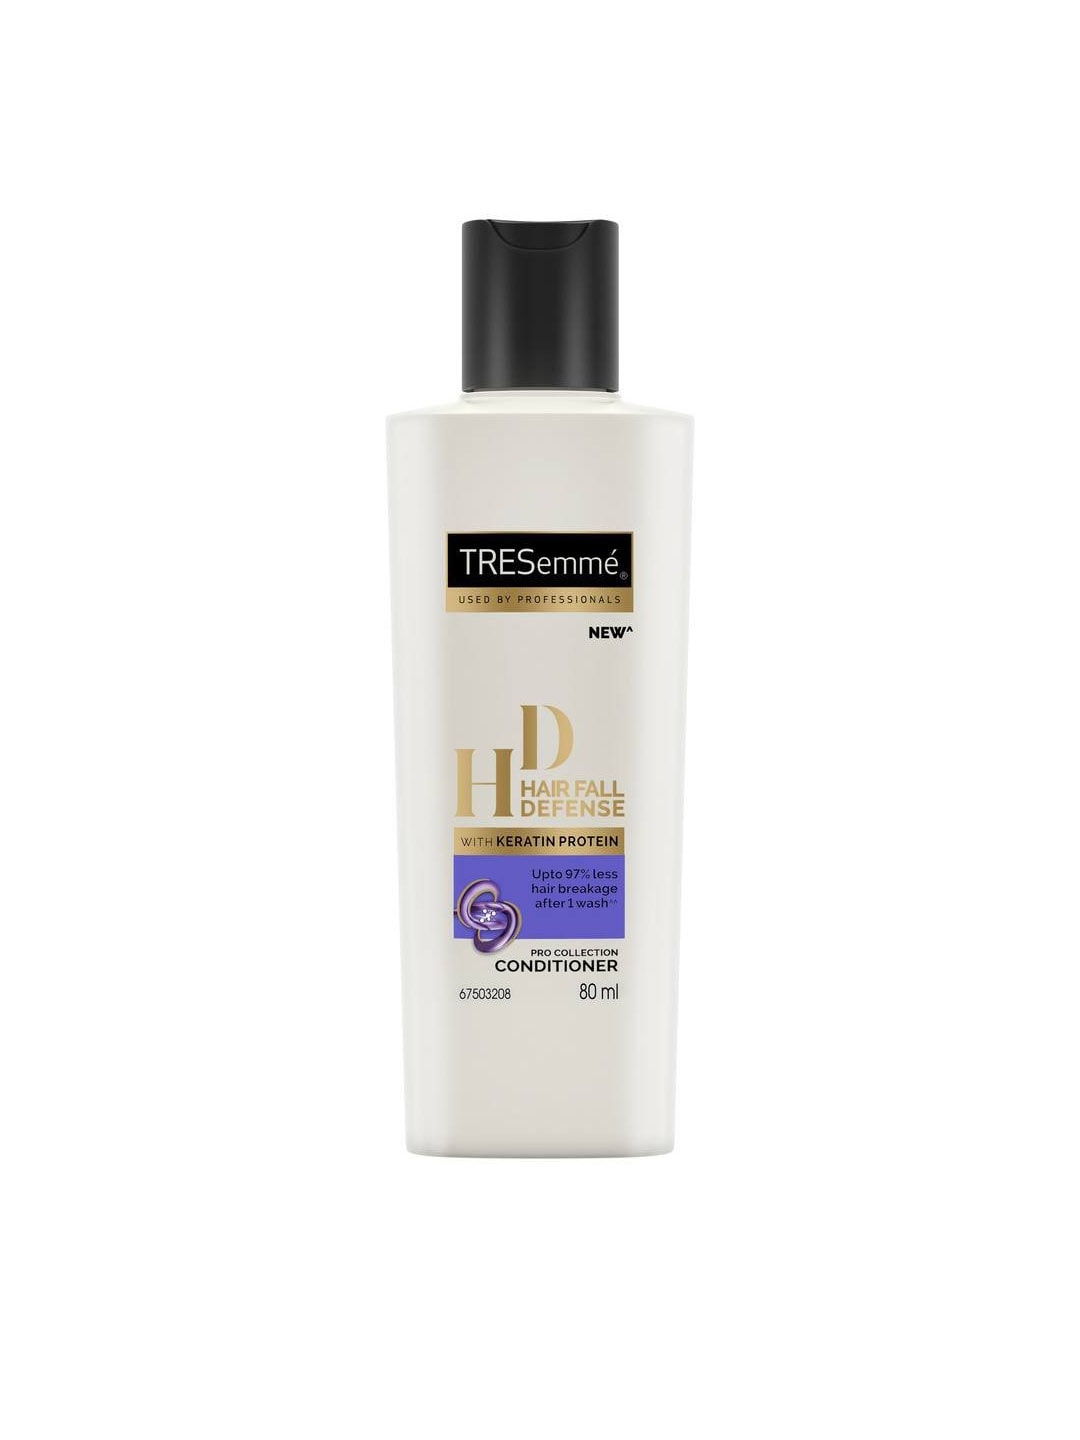 TRESemme Women Hair Fall Defense Conditioner 80 ml Price in India